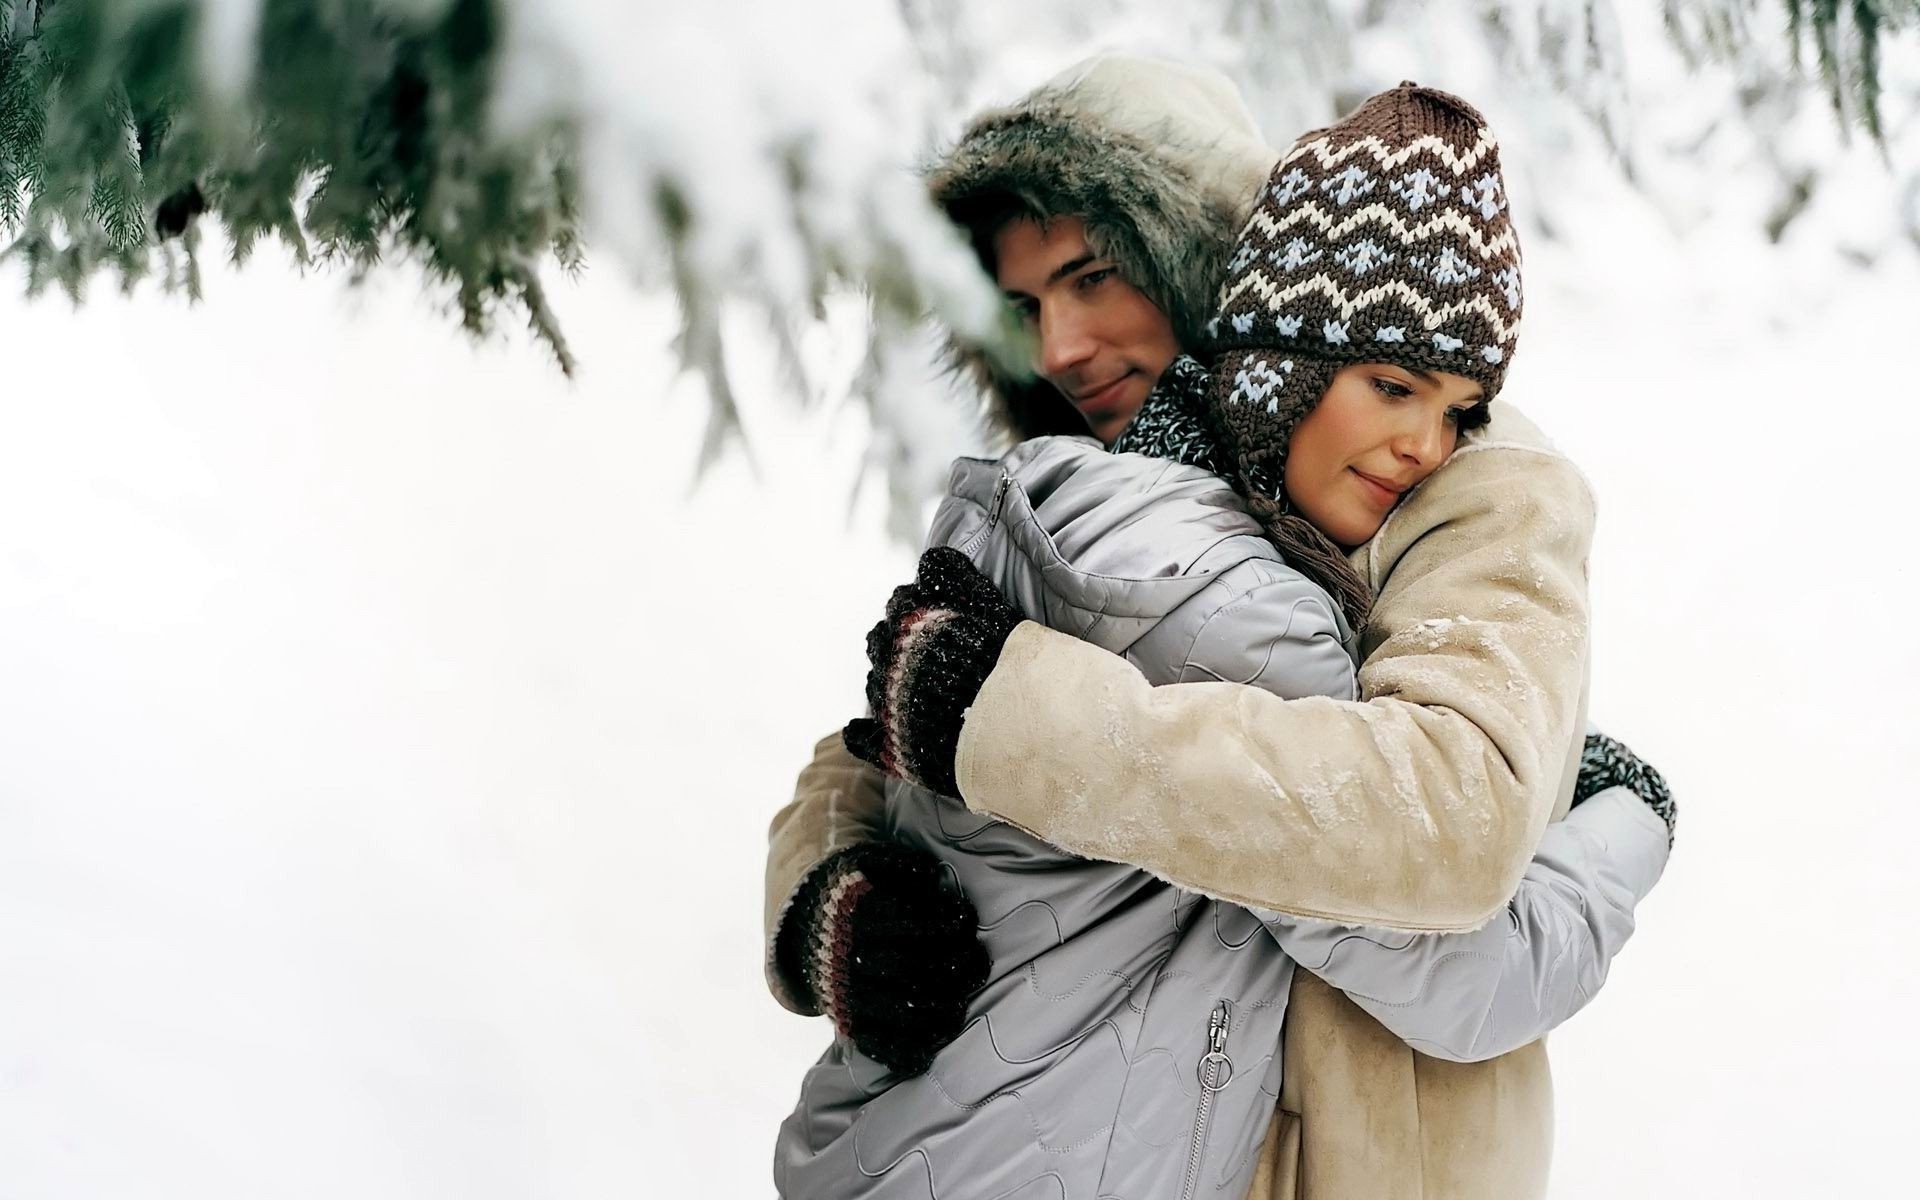 couples winter snow cold child outdoors fun gloves scarf lid wear frost christmas nature leisure